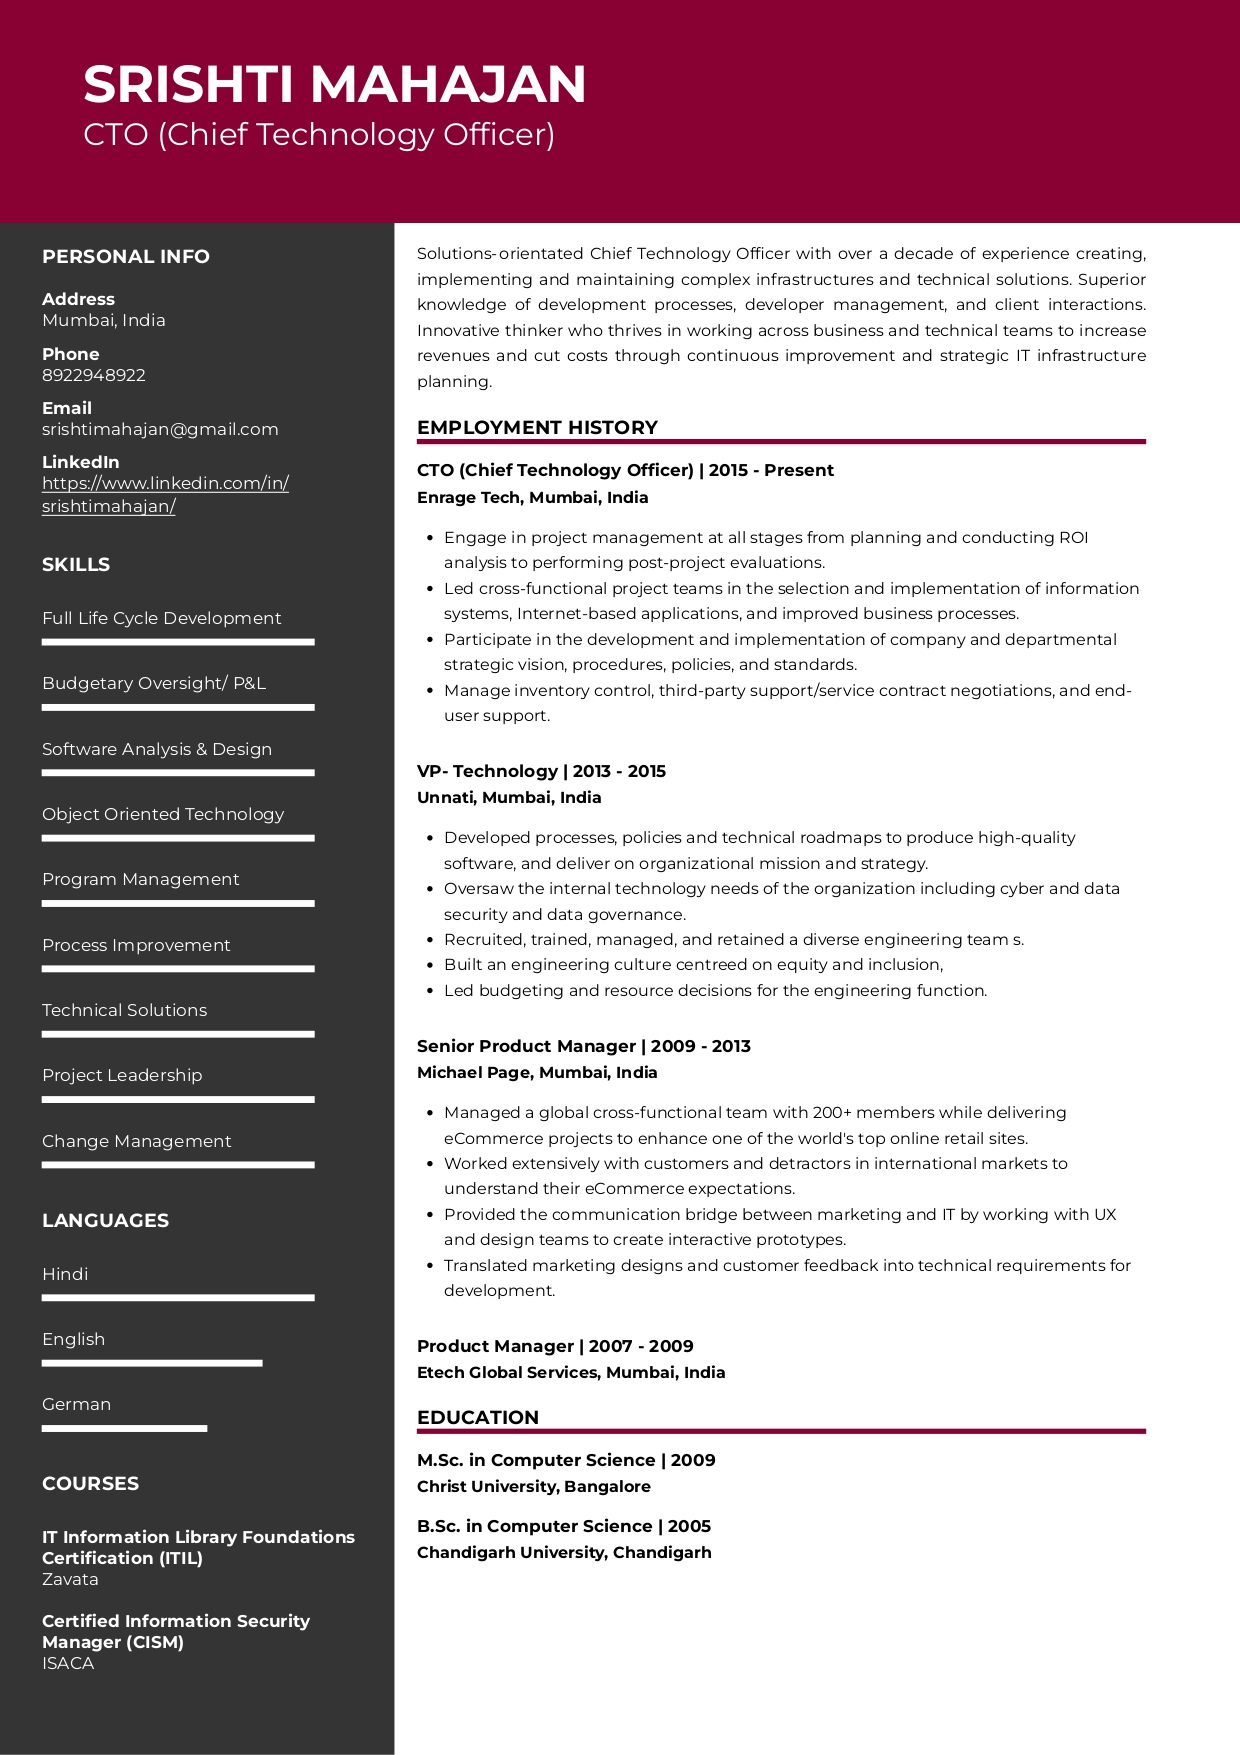 Resume of Chief Technology Officer (CTO)